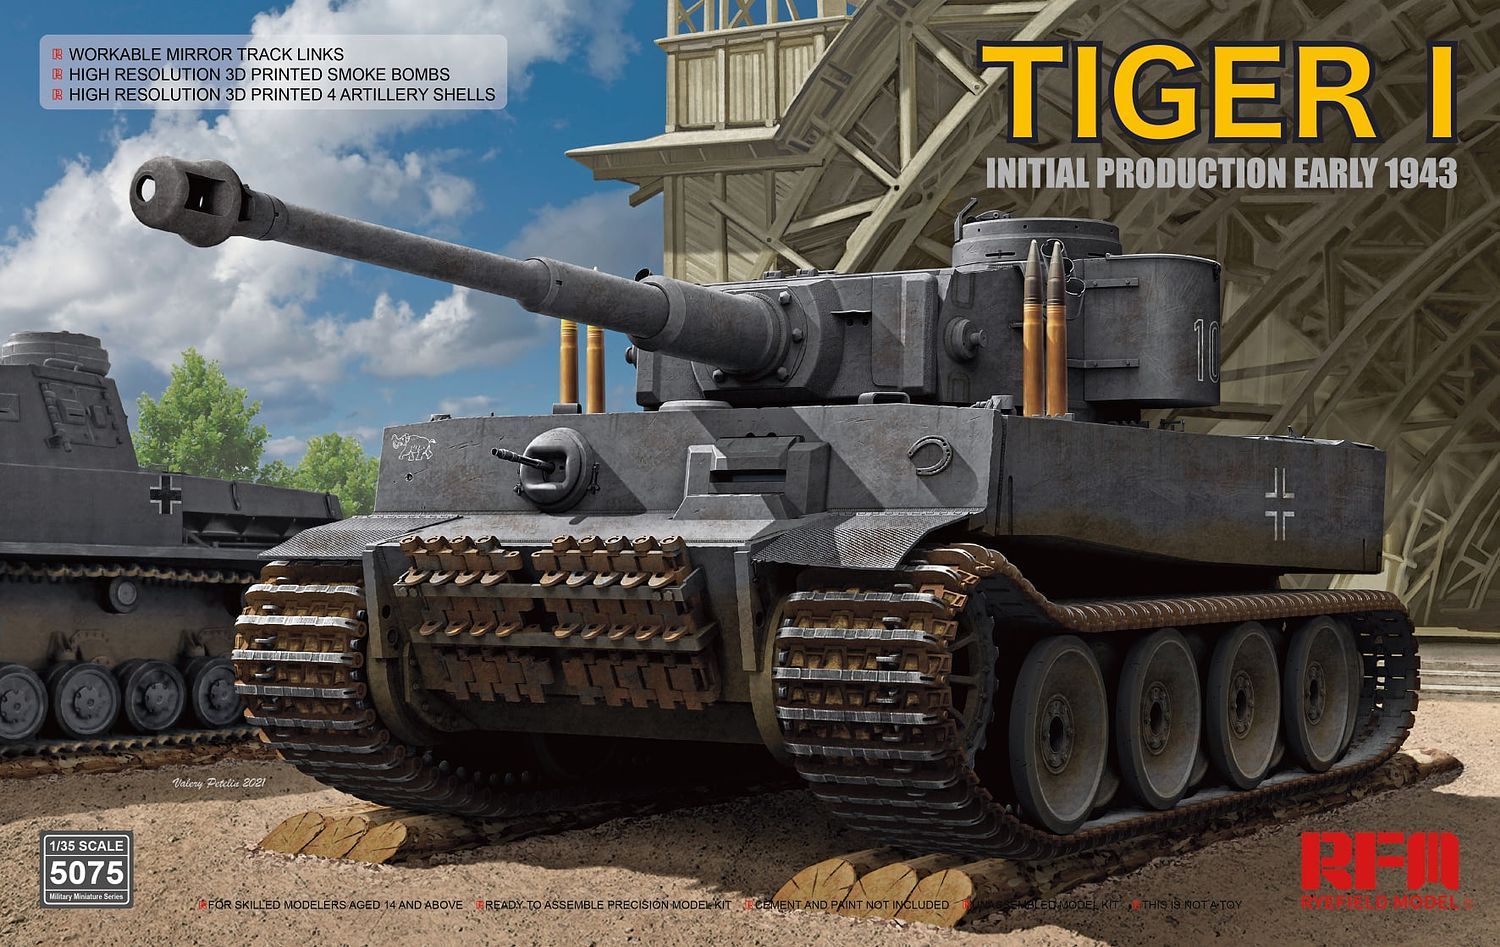 Rye Field Model Tiger I Initial Production Early Tanks My Xxx Hot Girl